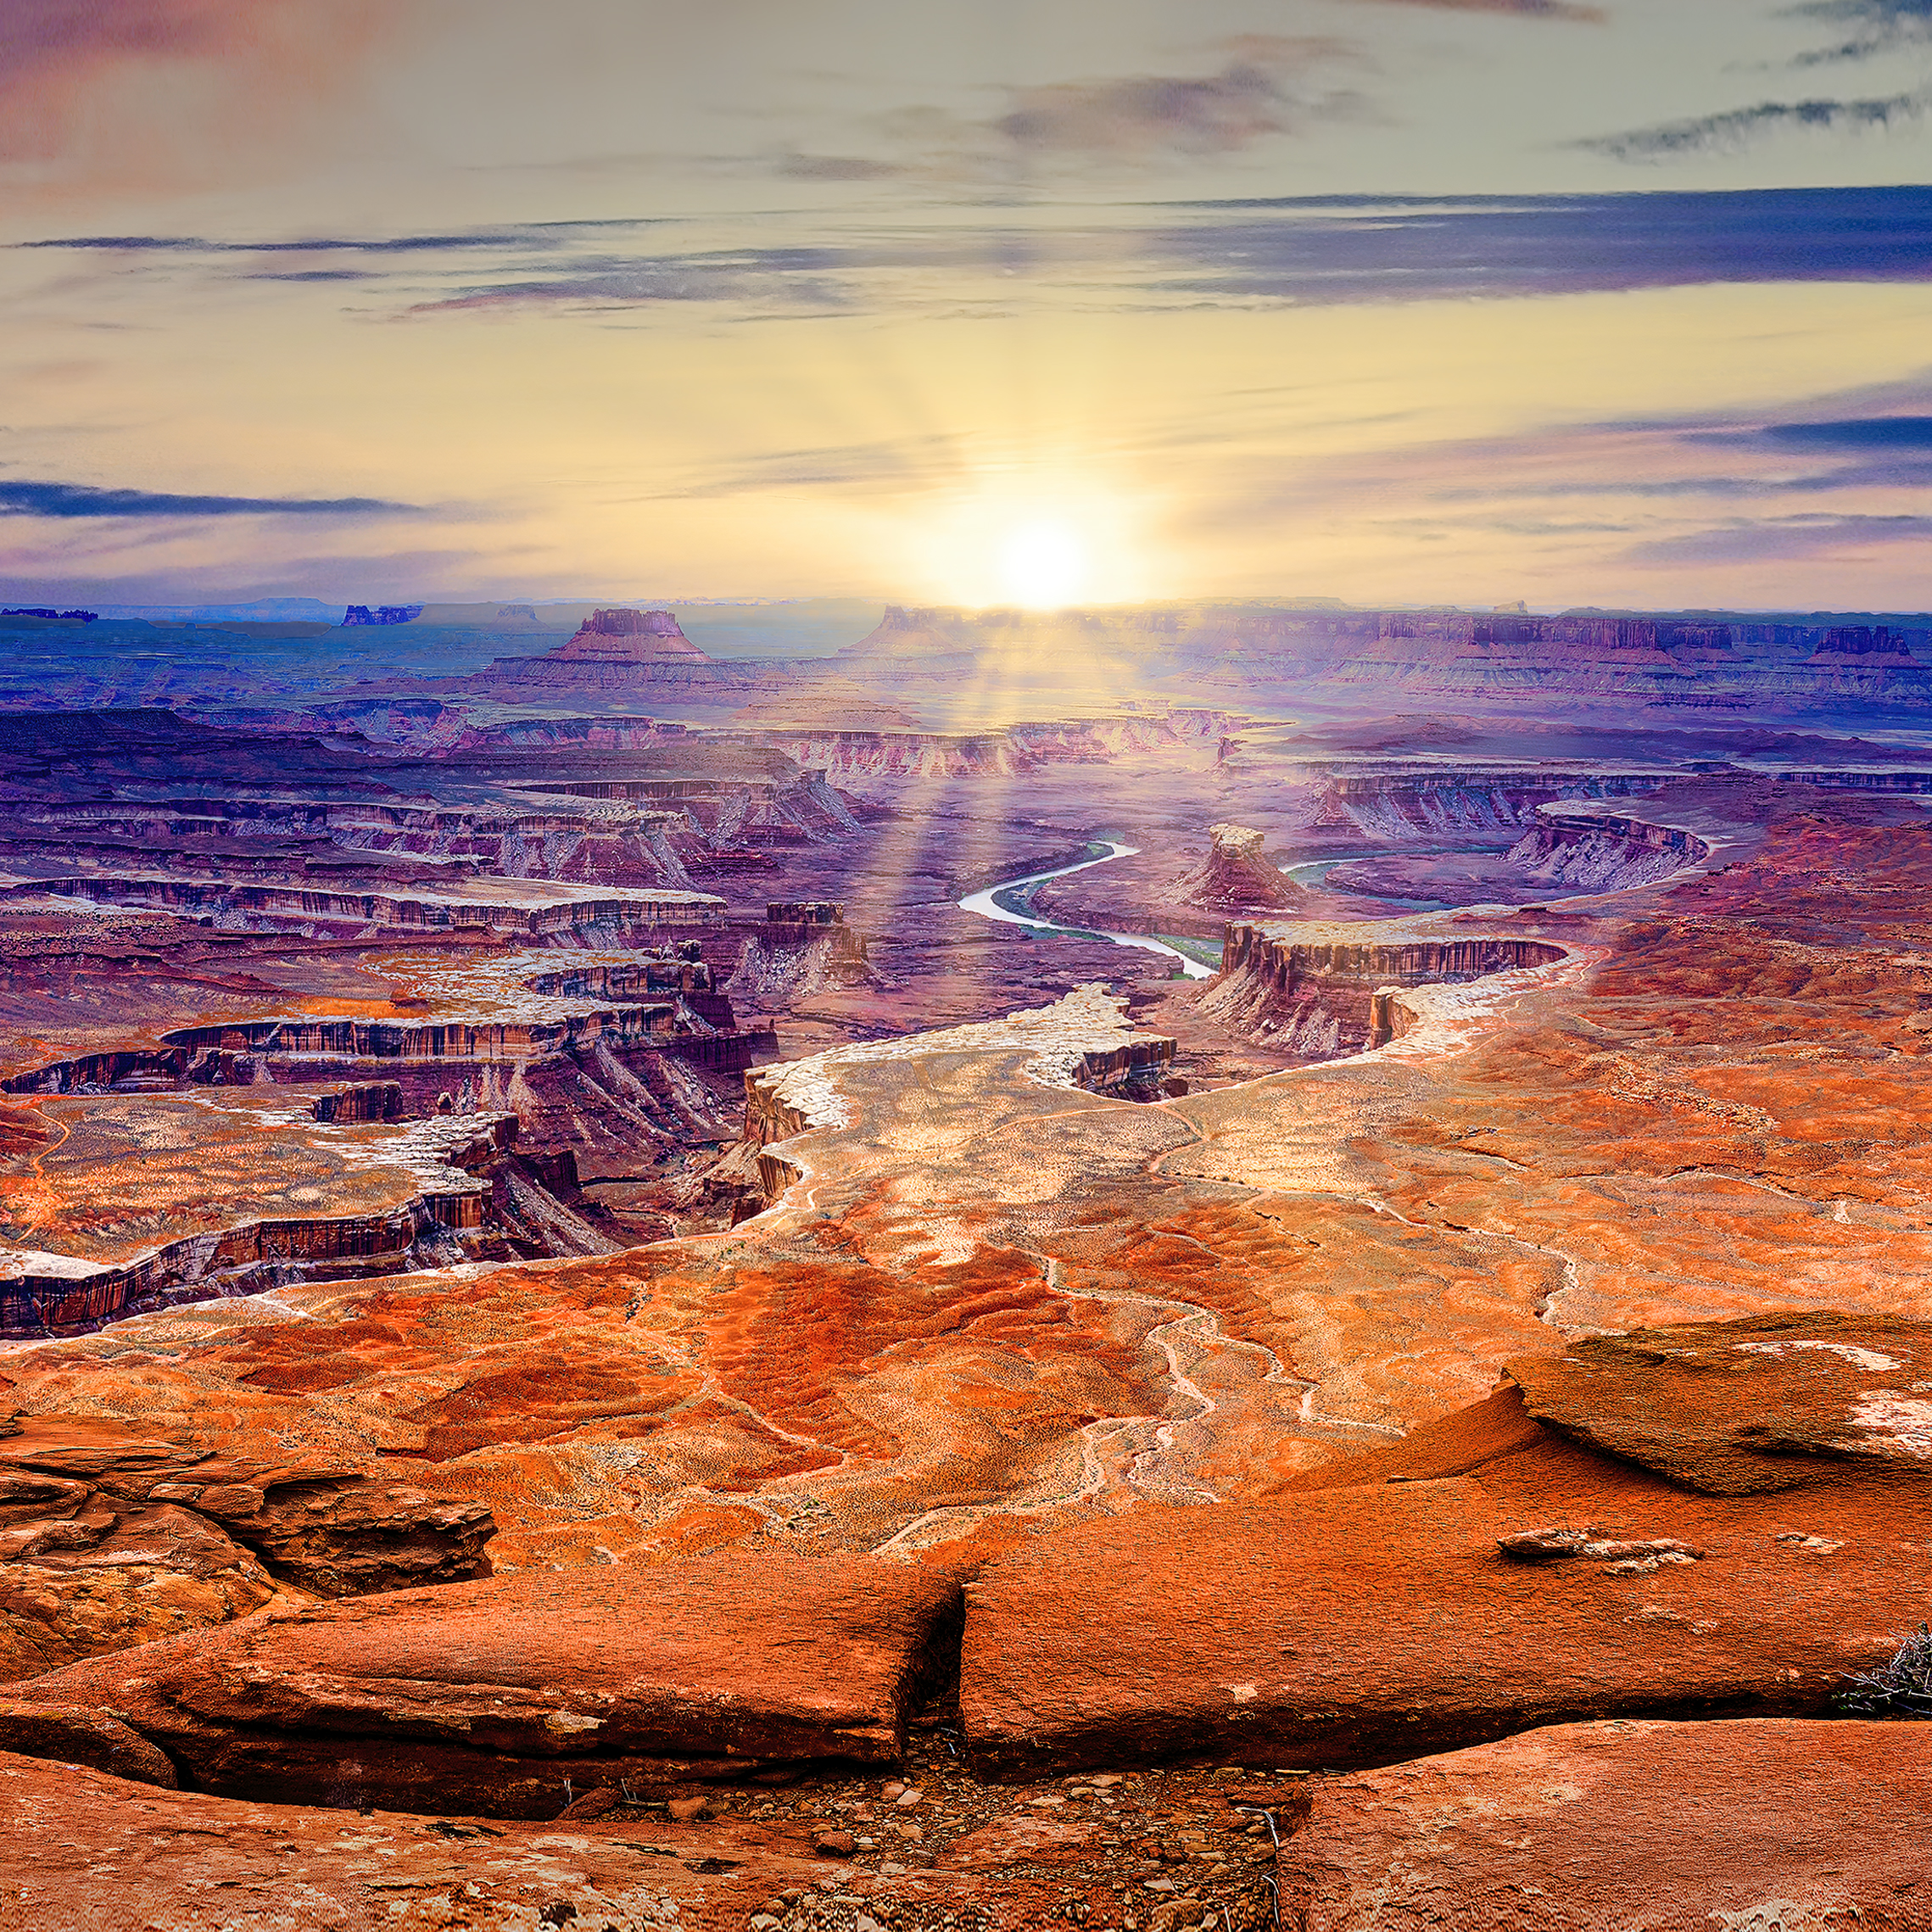 GREEN RIVER OVERLOOK - located in Canyonlands National Park and one of my favorite locations to photograph. This view is also available in a much wider panorama shot.  